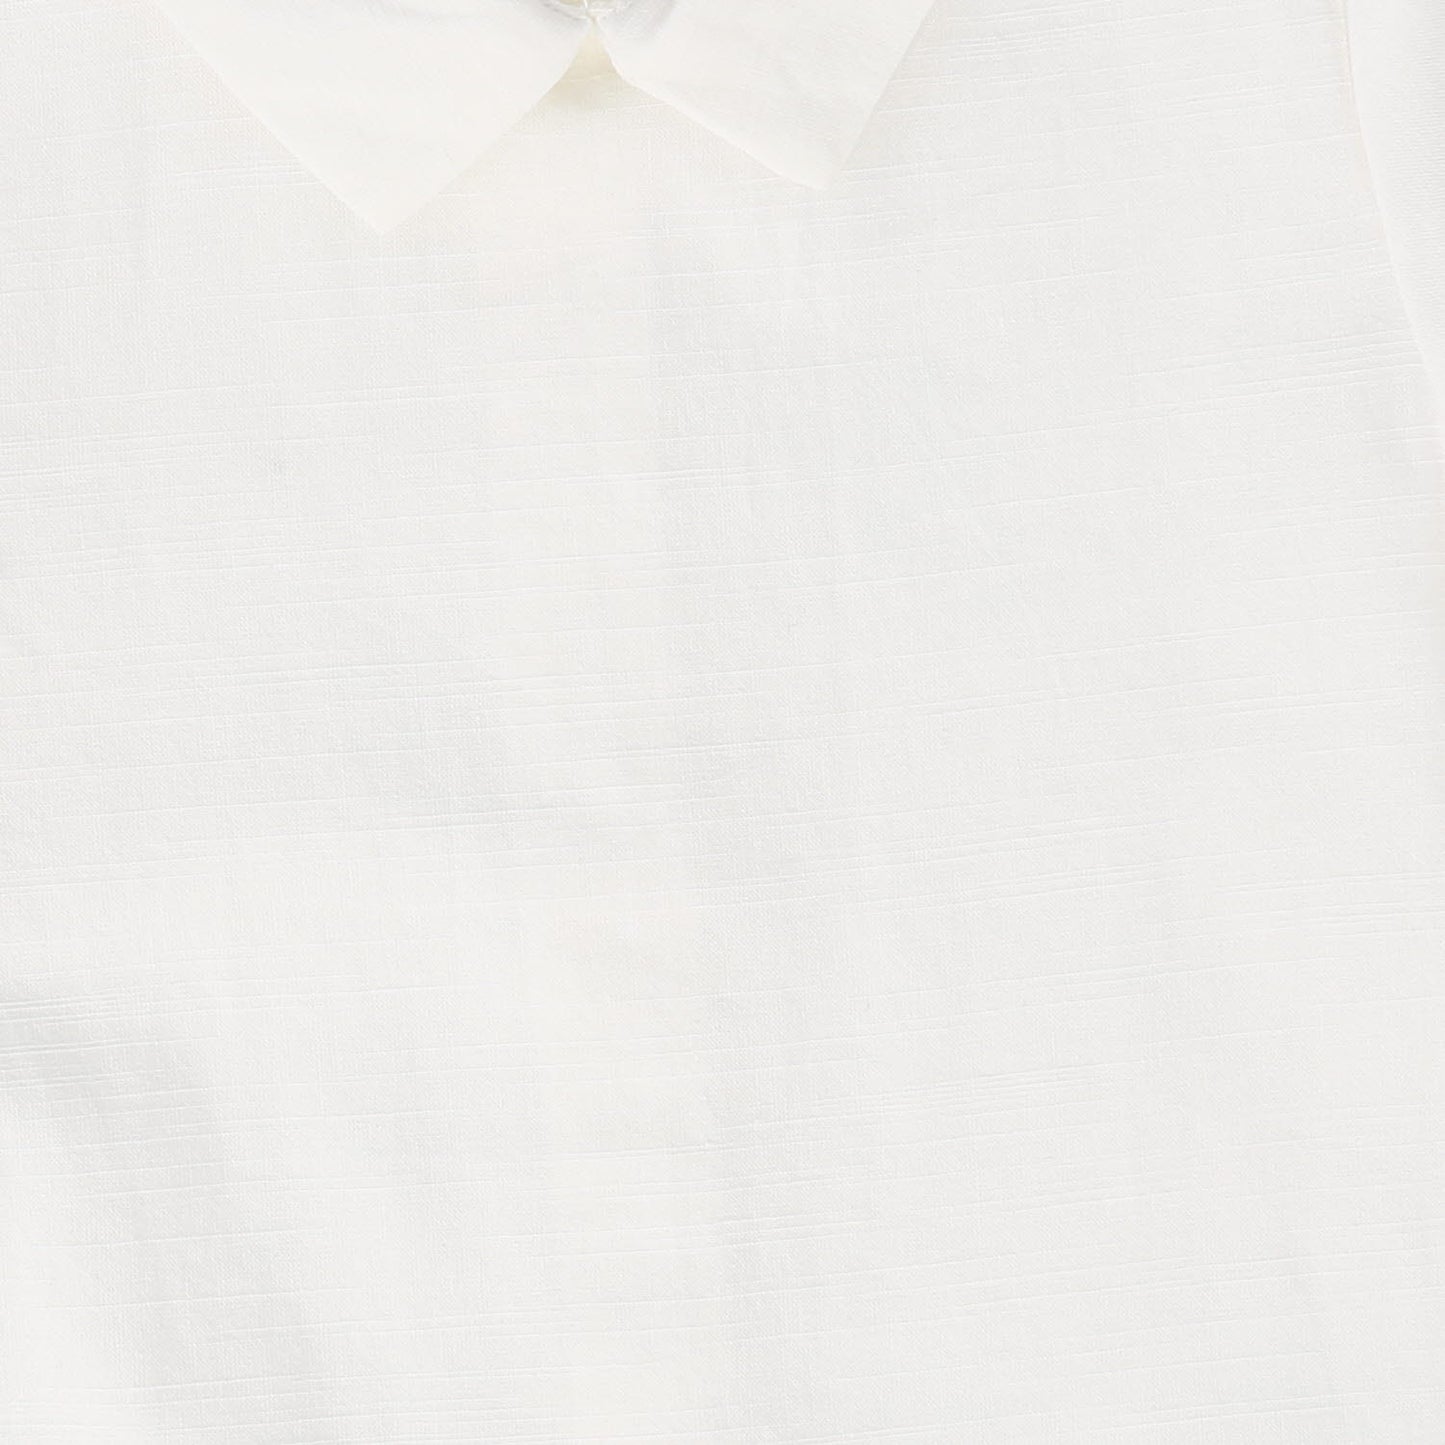 BACE COLLECTION WHITE COLLAR SHIRT [FINAL SALE]